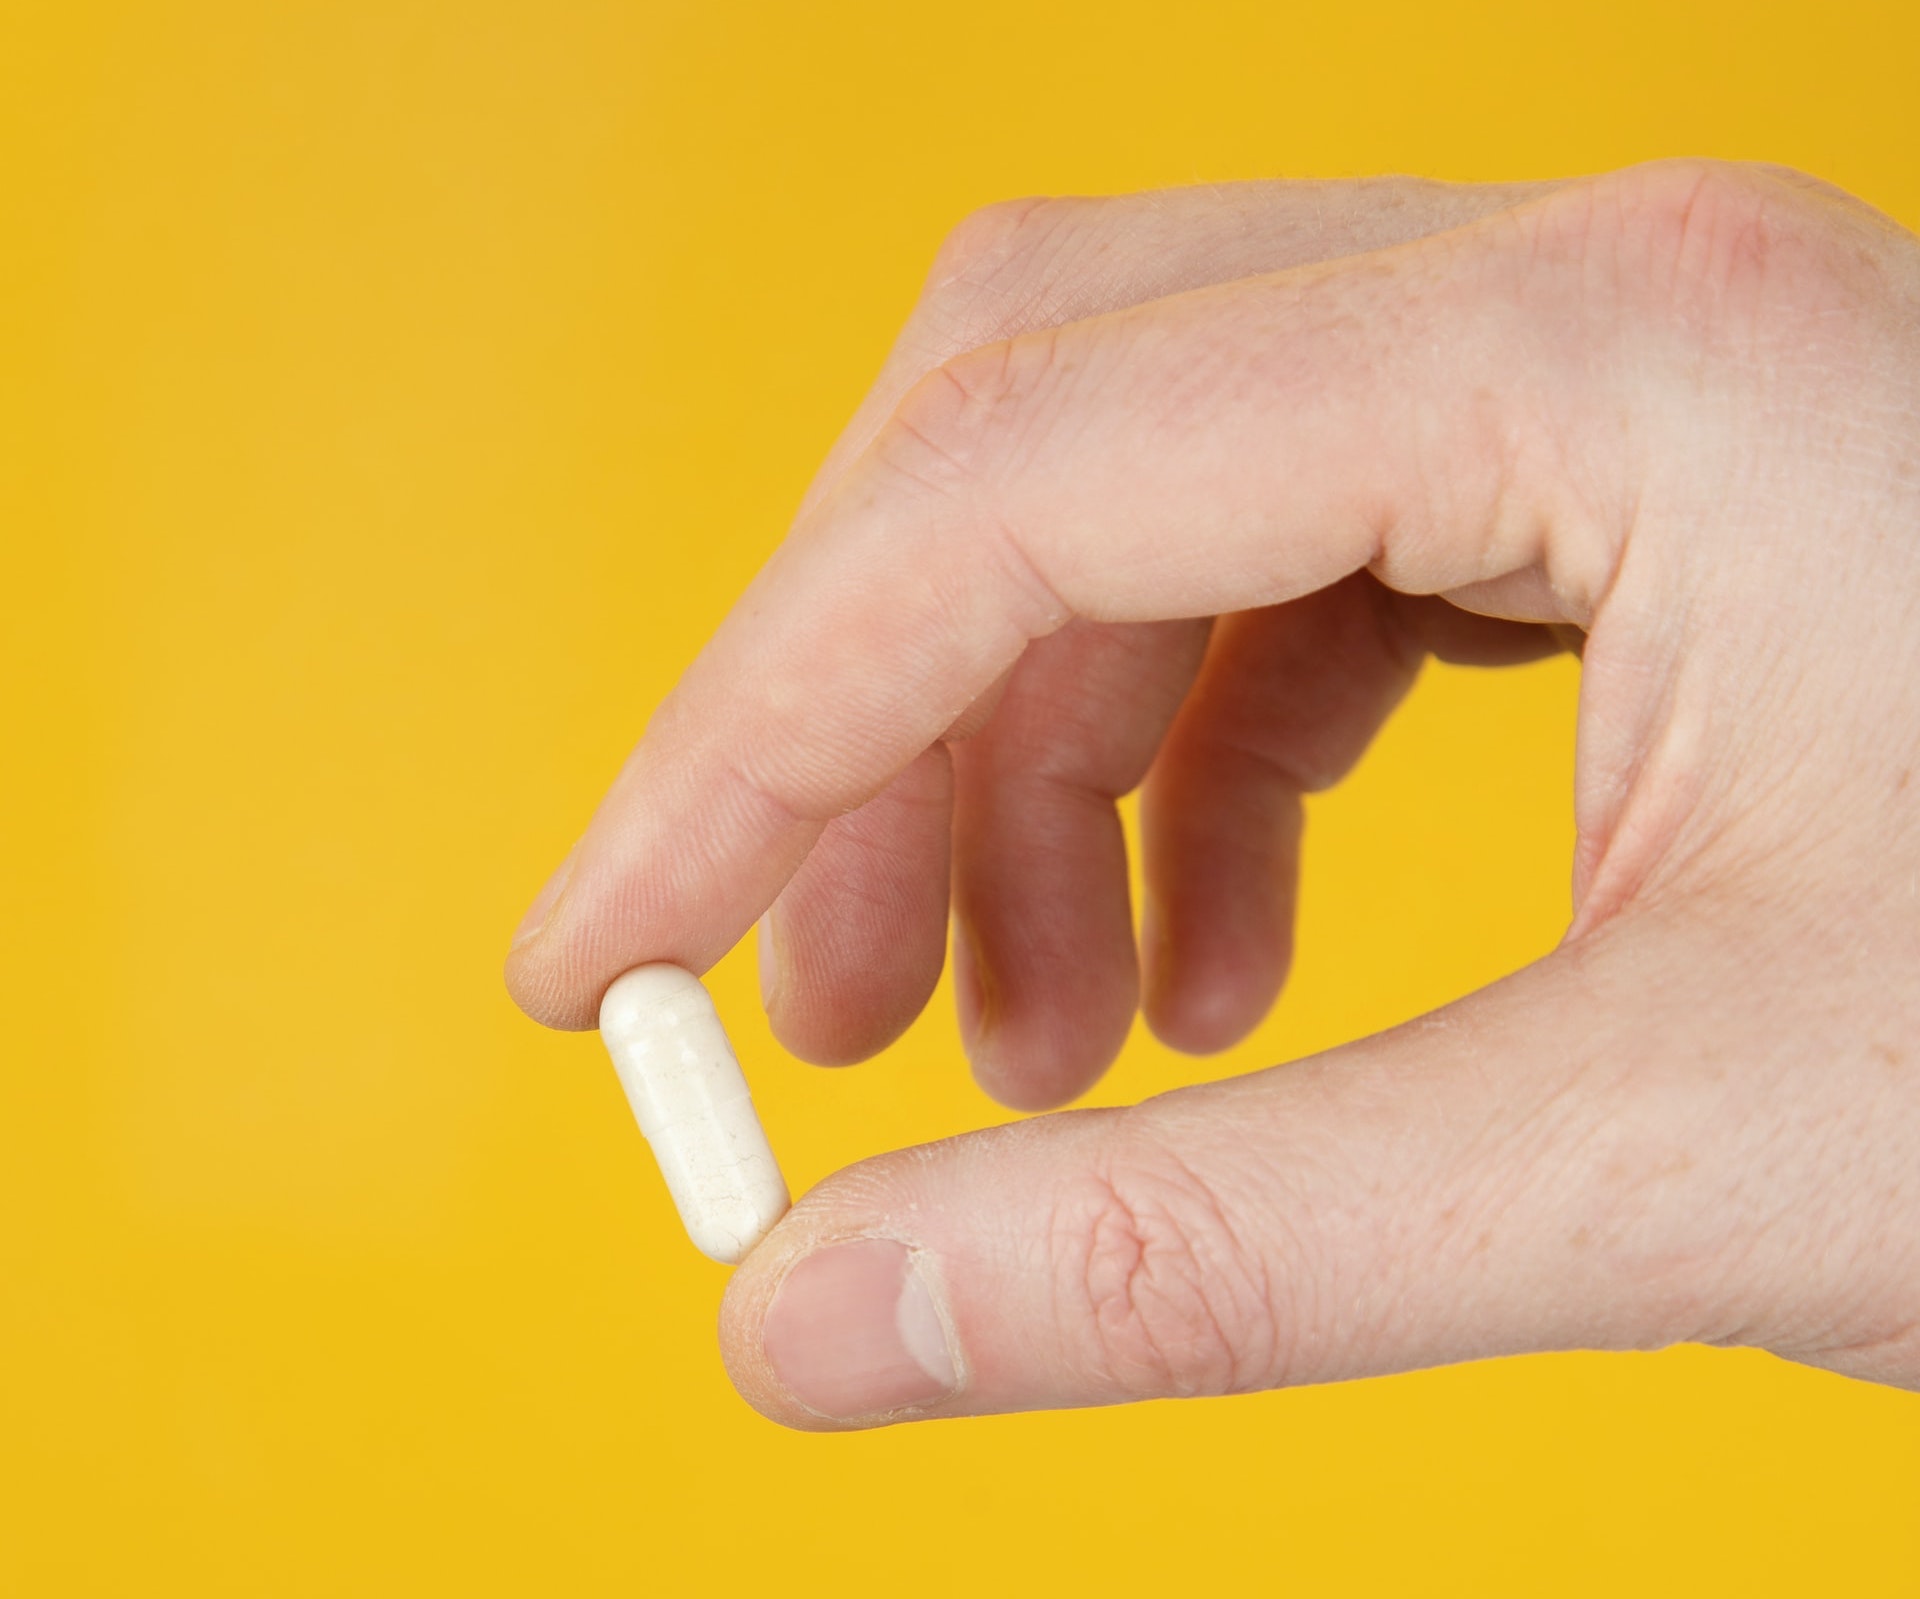 two fingers holding a vitamin capsule against a yellow background